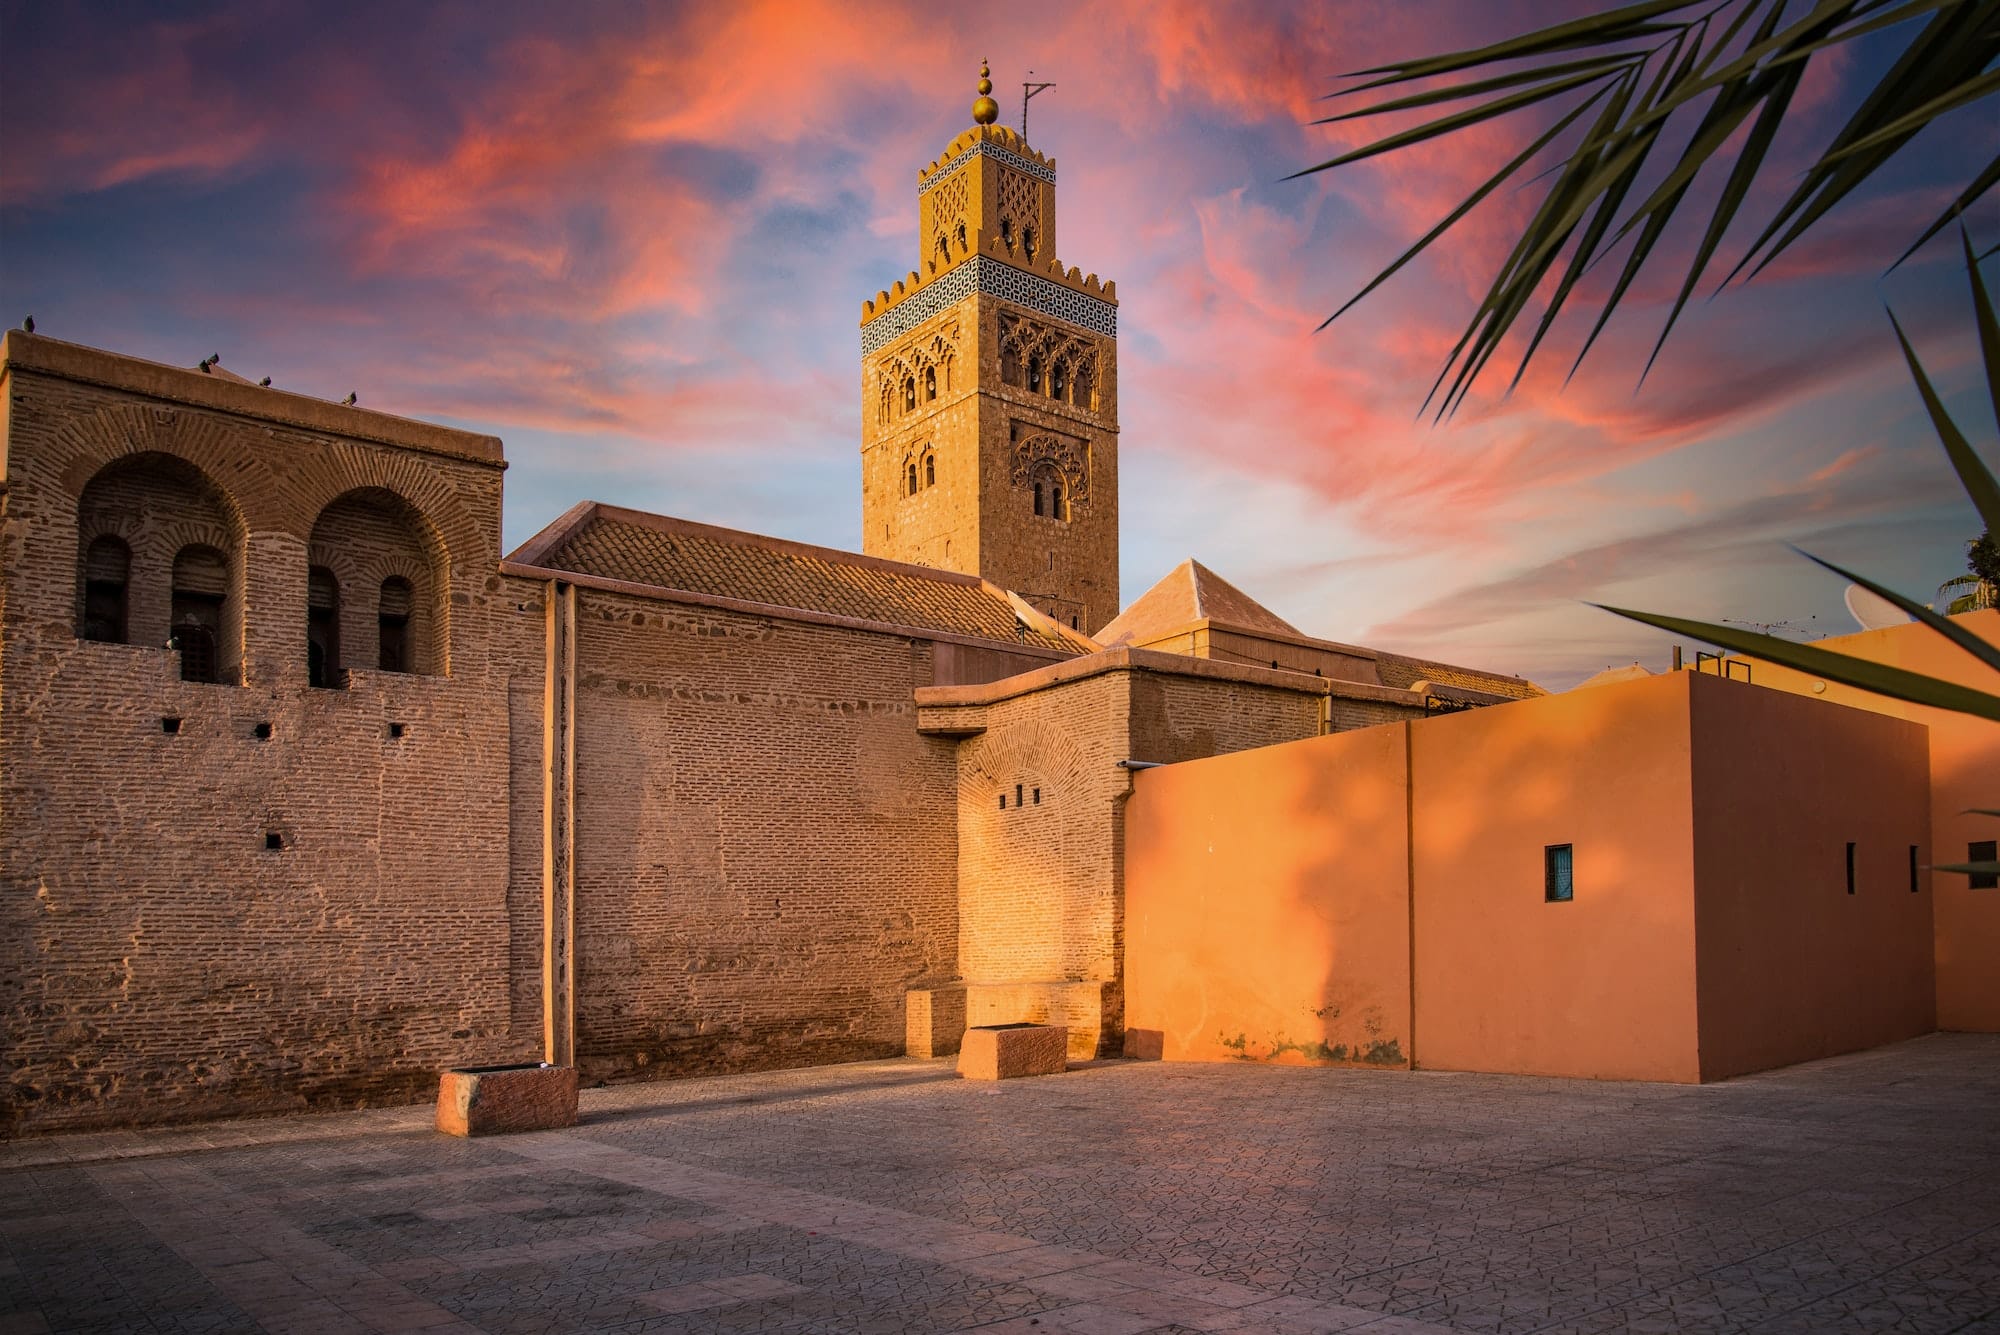 Koutoubia Mosque in Marrakesh,Morocco. Beautiful Sunlight at Sunset